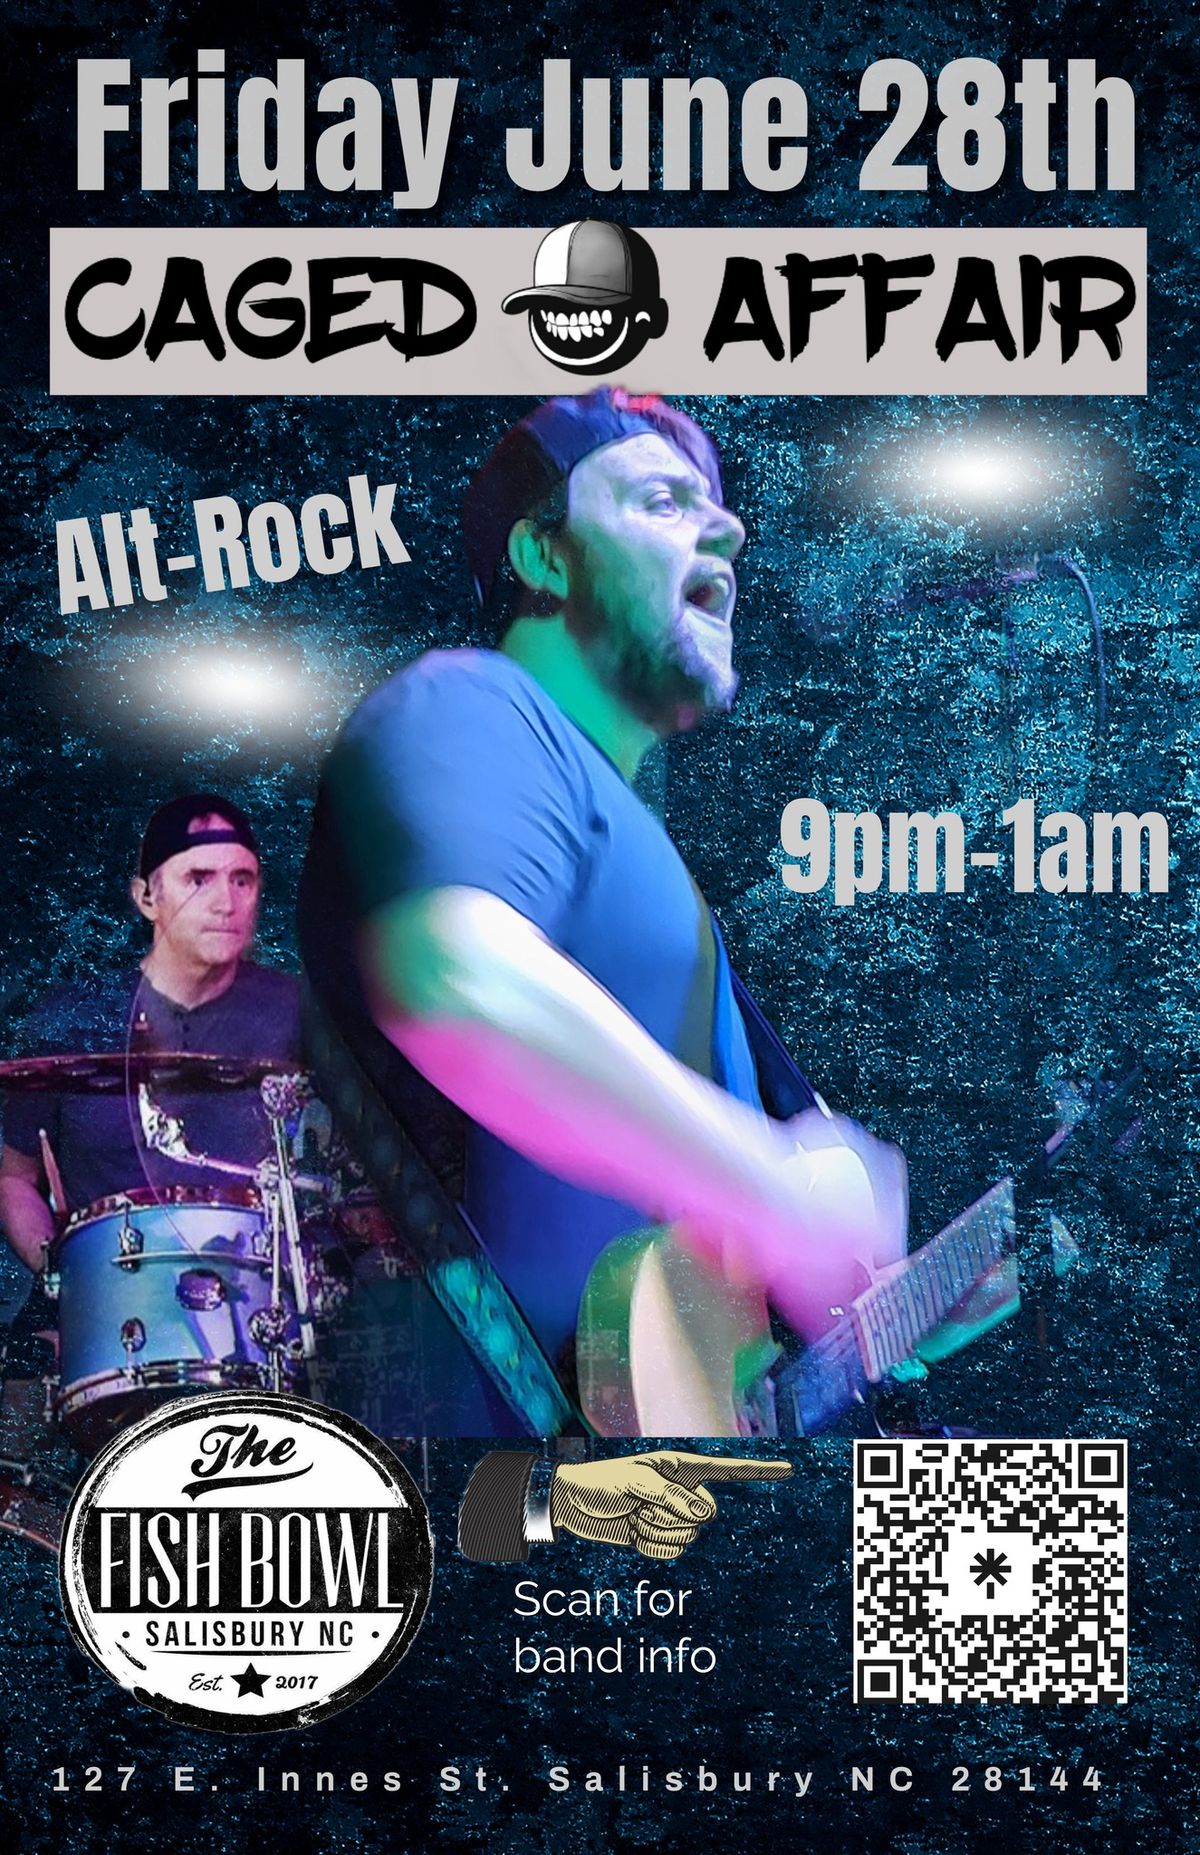 Caged Affair @The Fish Bowl in Salisbury NC 